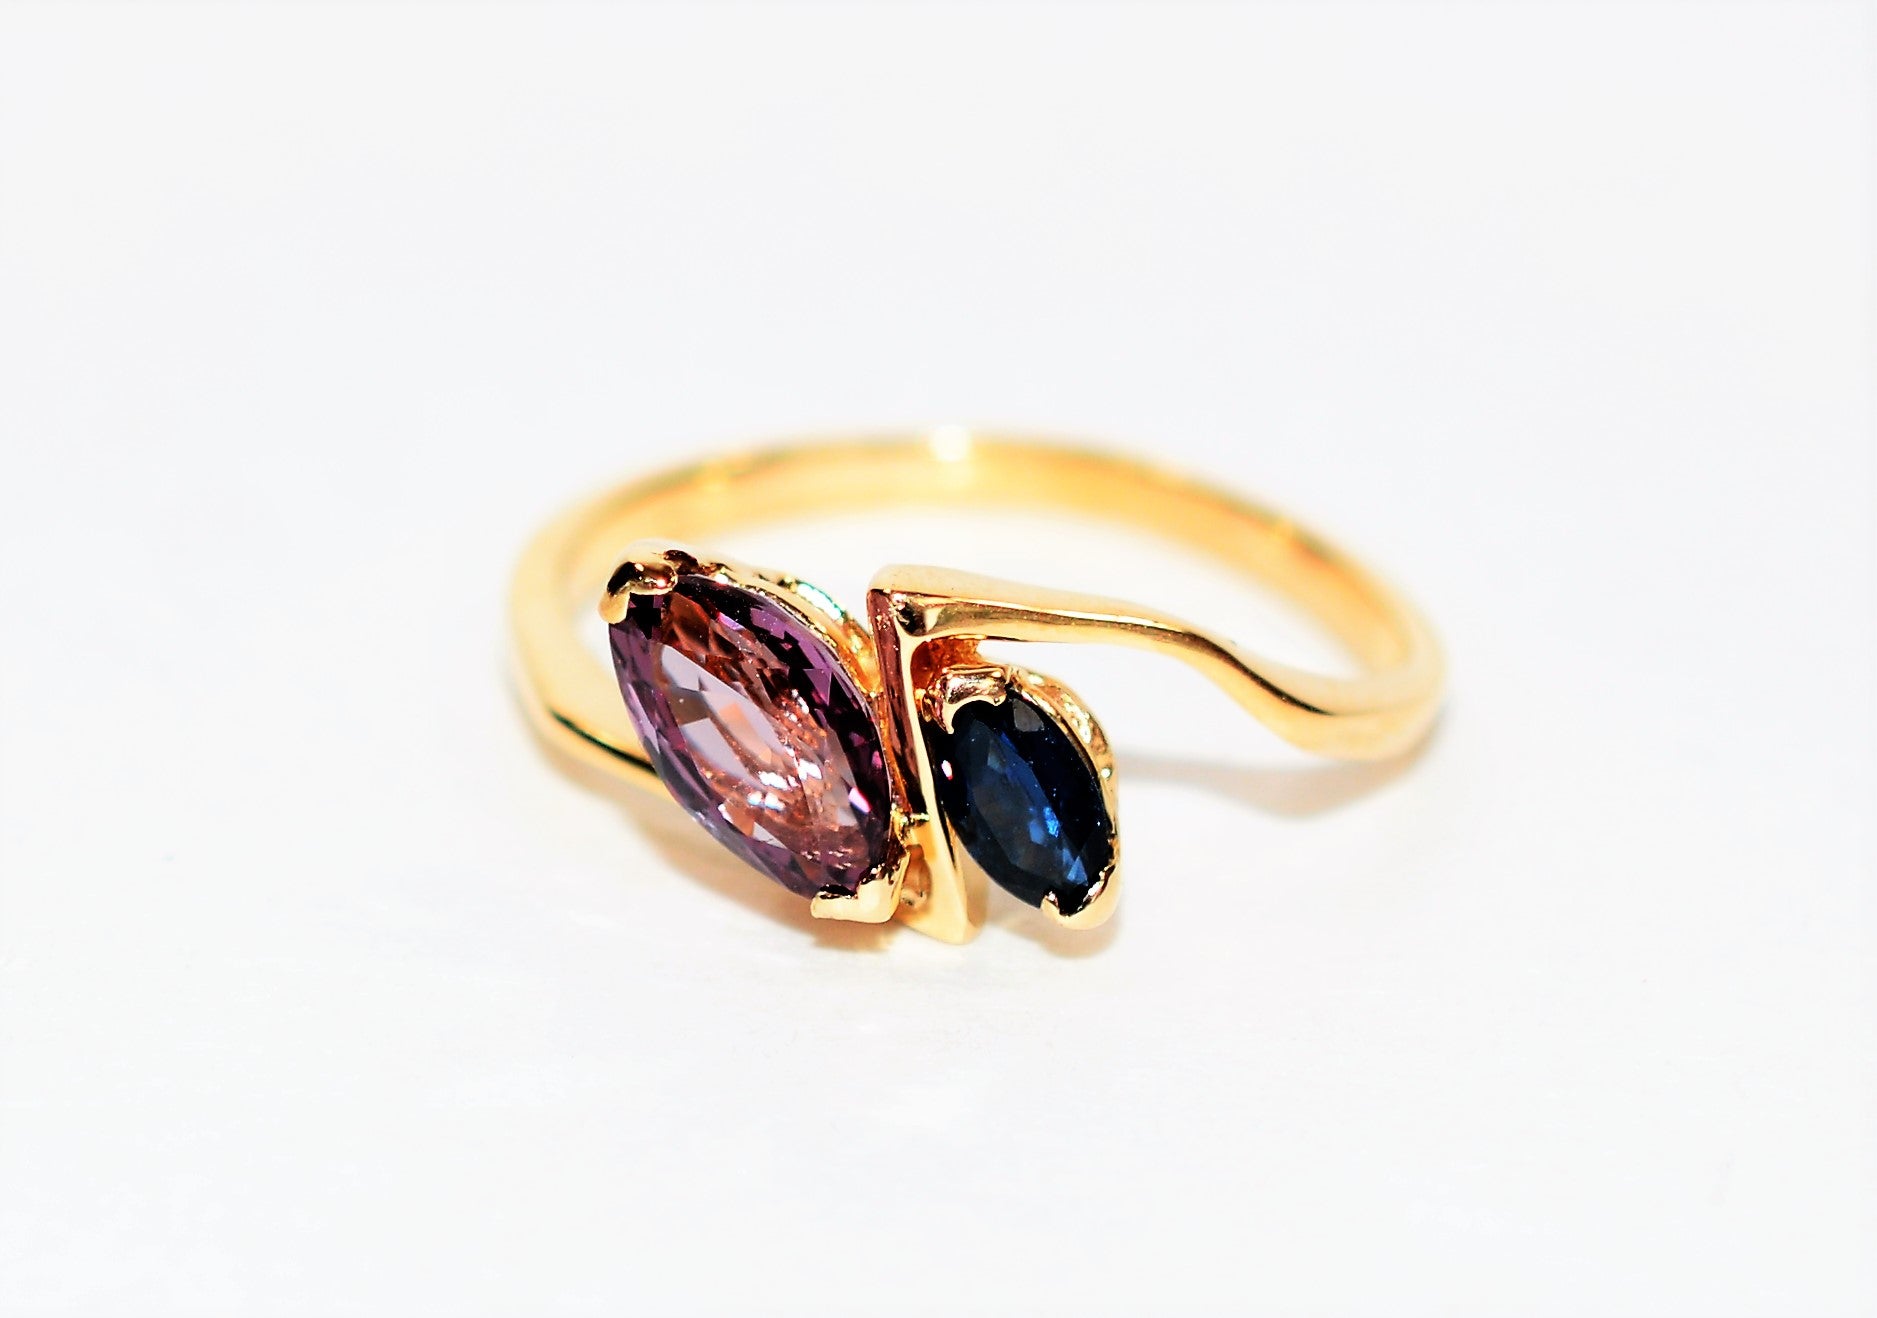 Natural Spinel & Blue Sapphire Ring 14K Solid Gold .86tcw Gemstone Ring Birthstone Ring Multistone Ring Statement Ring Women's Ring Jewelry